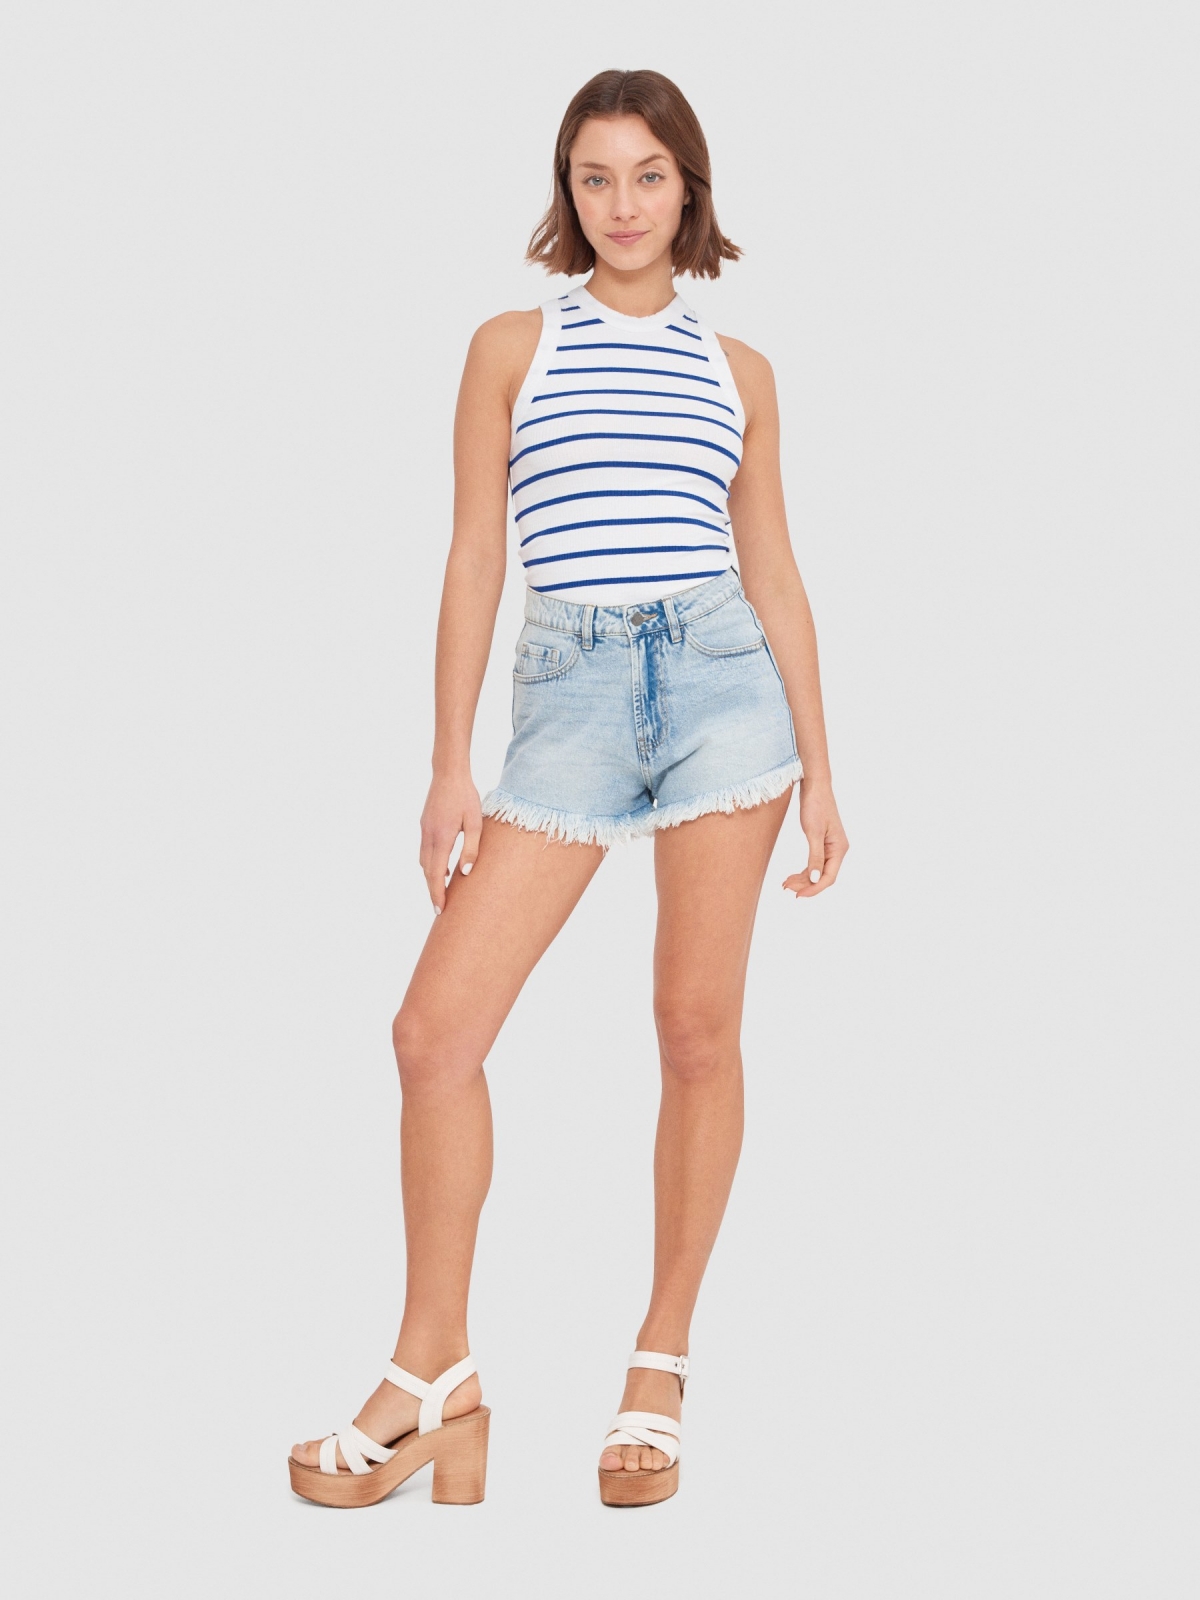 Sleeveless striped top blue front view